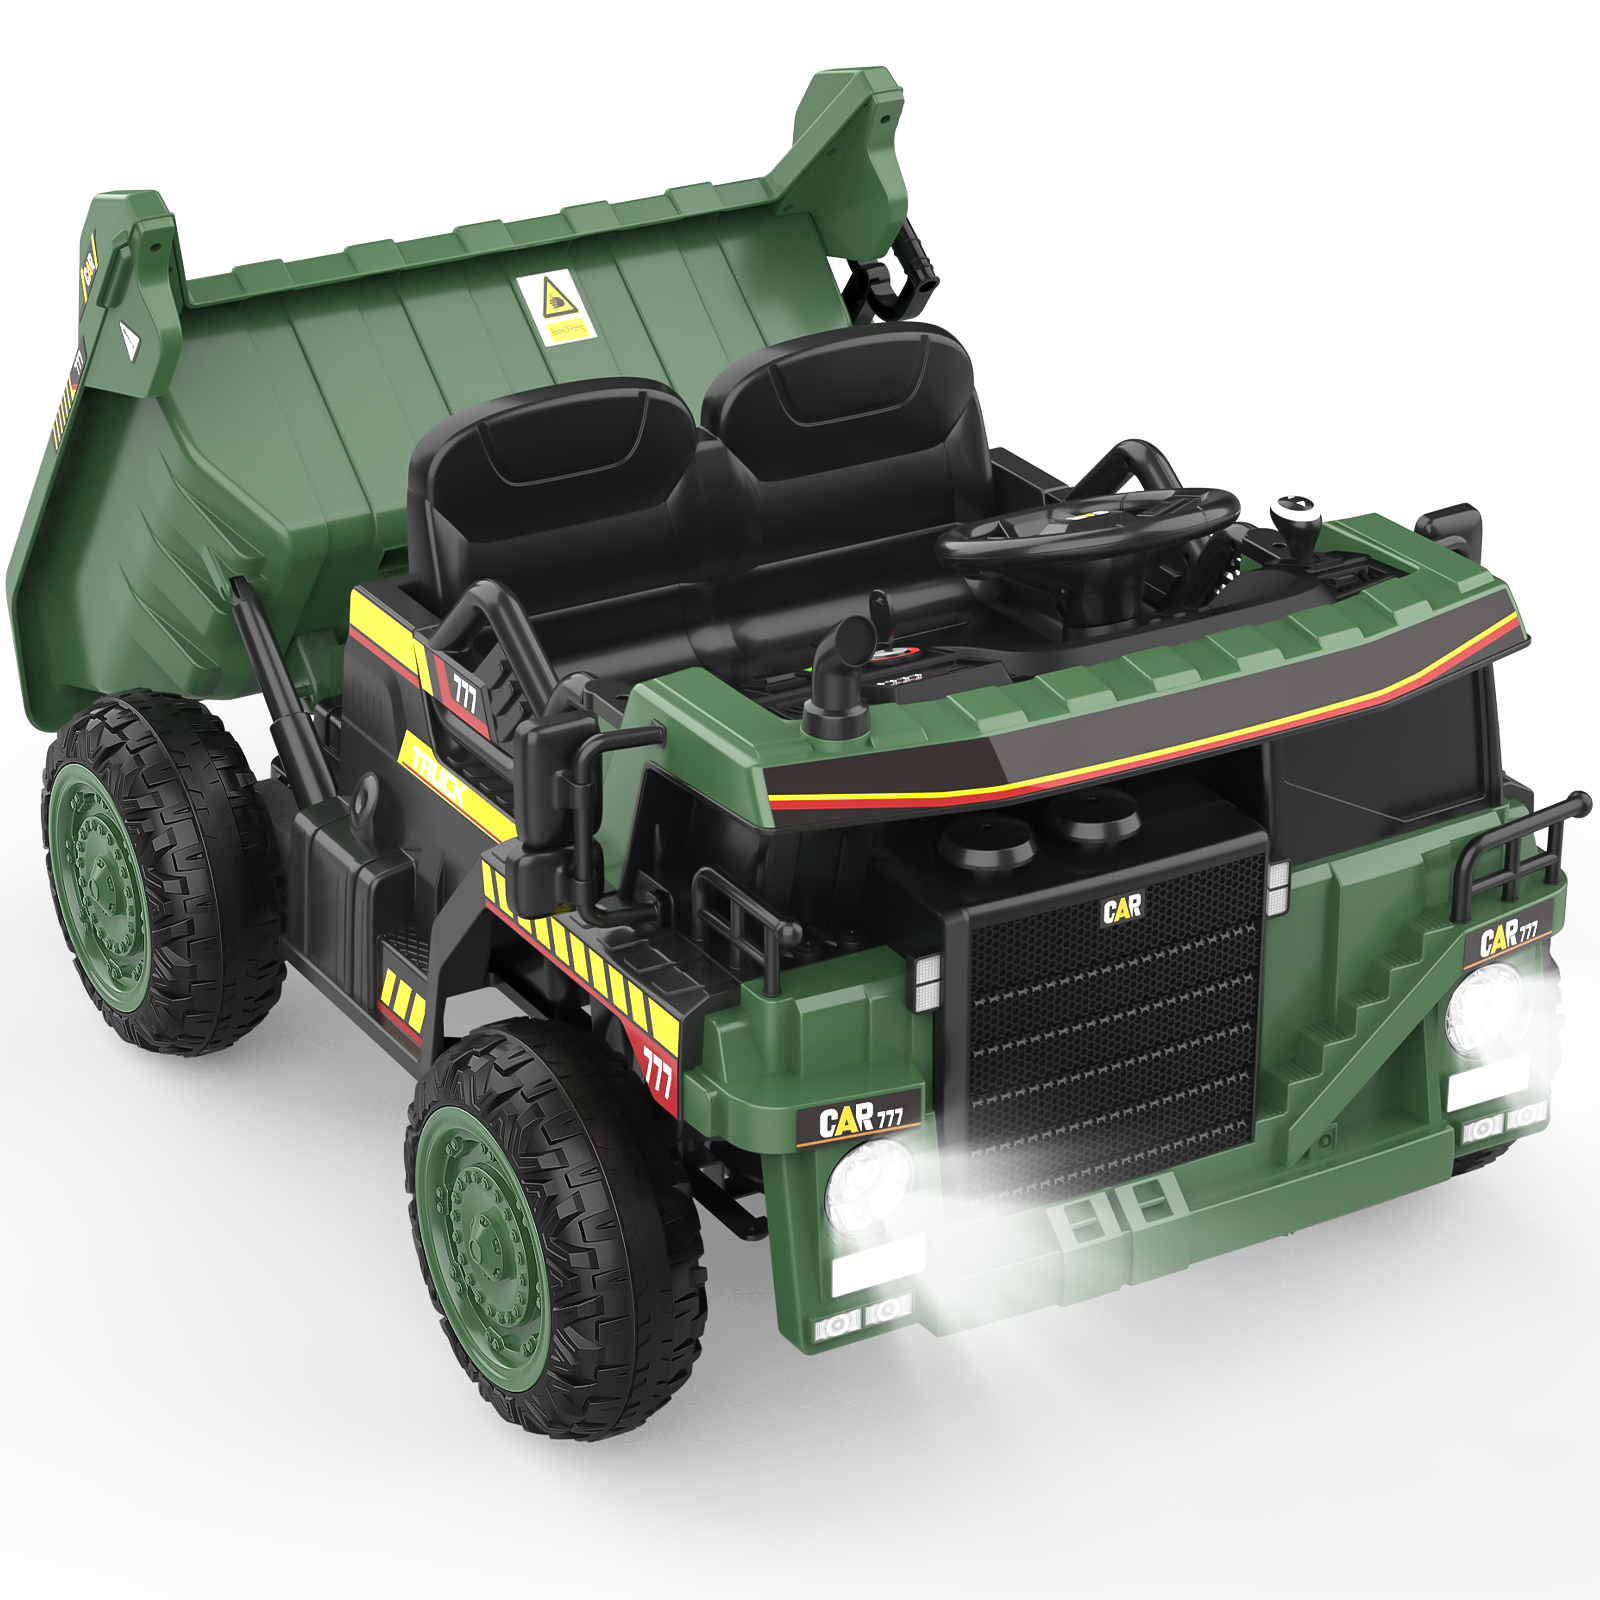 TOKTOO 12V Battery Powered Ride-on Dump Truck with Remote Control, Music Player, Electric Dump Bucket, Kids Tractor-Dark Green - image 1 of 7